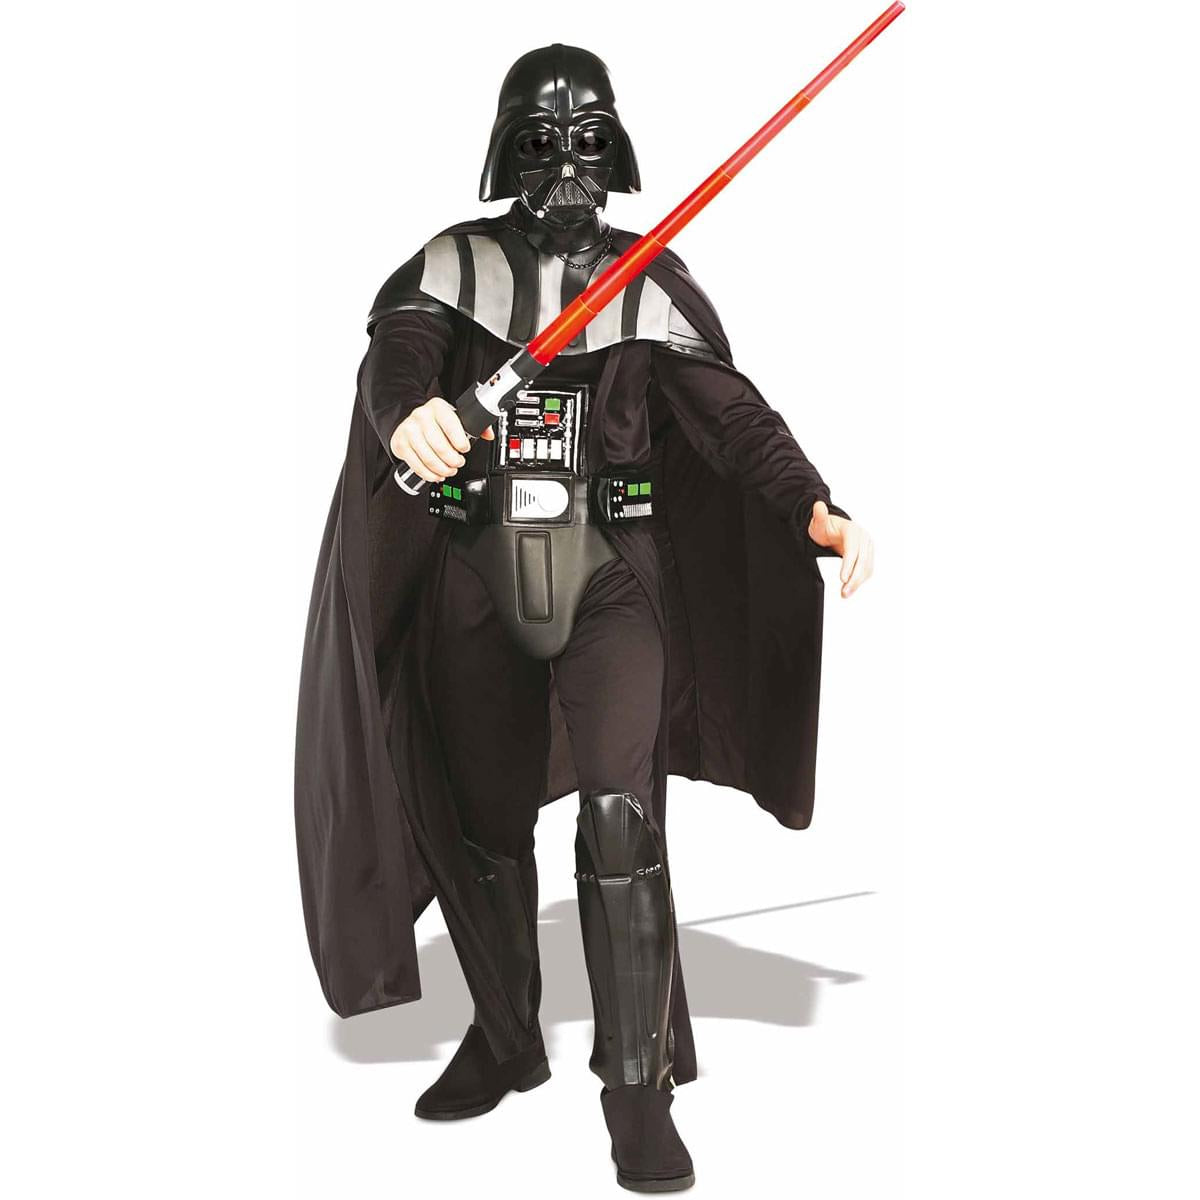 Star Wars Darth Vader Deluxe Costume Adult